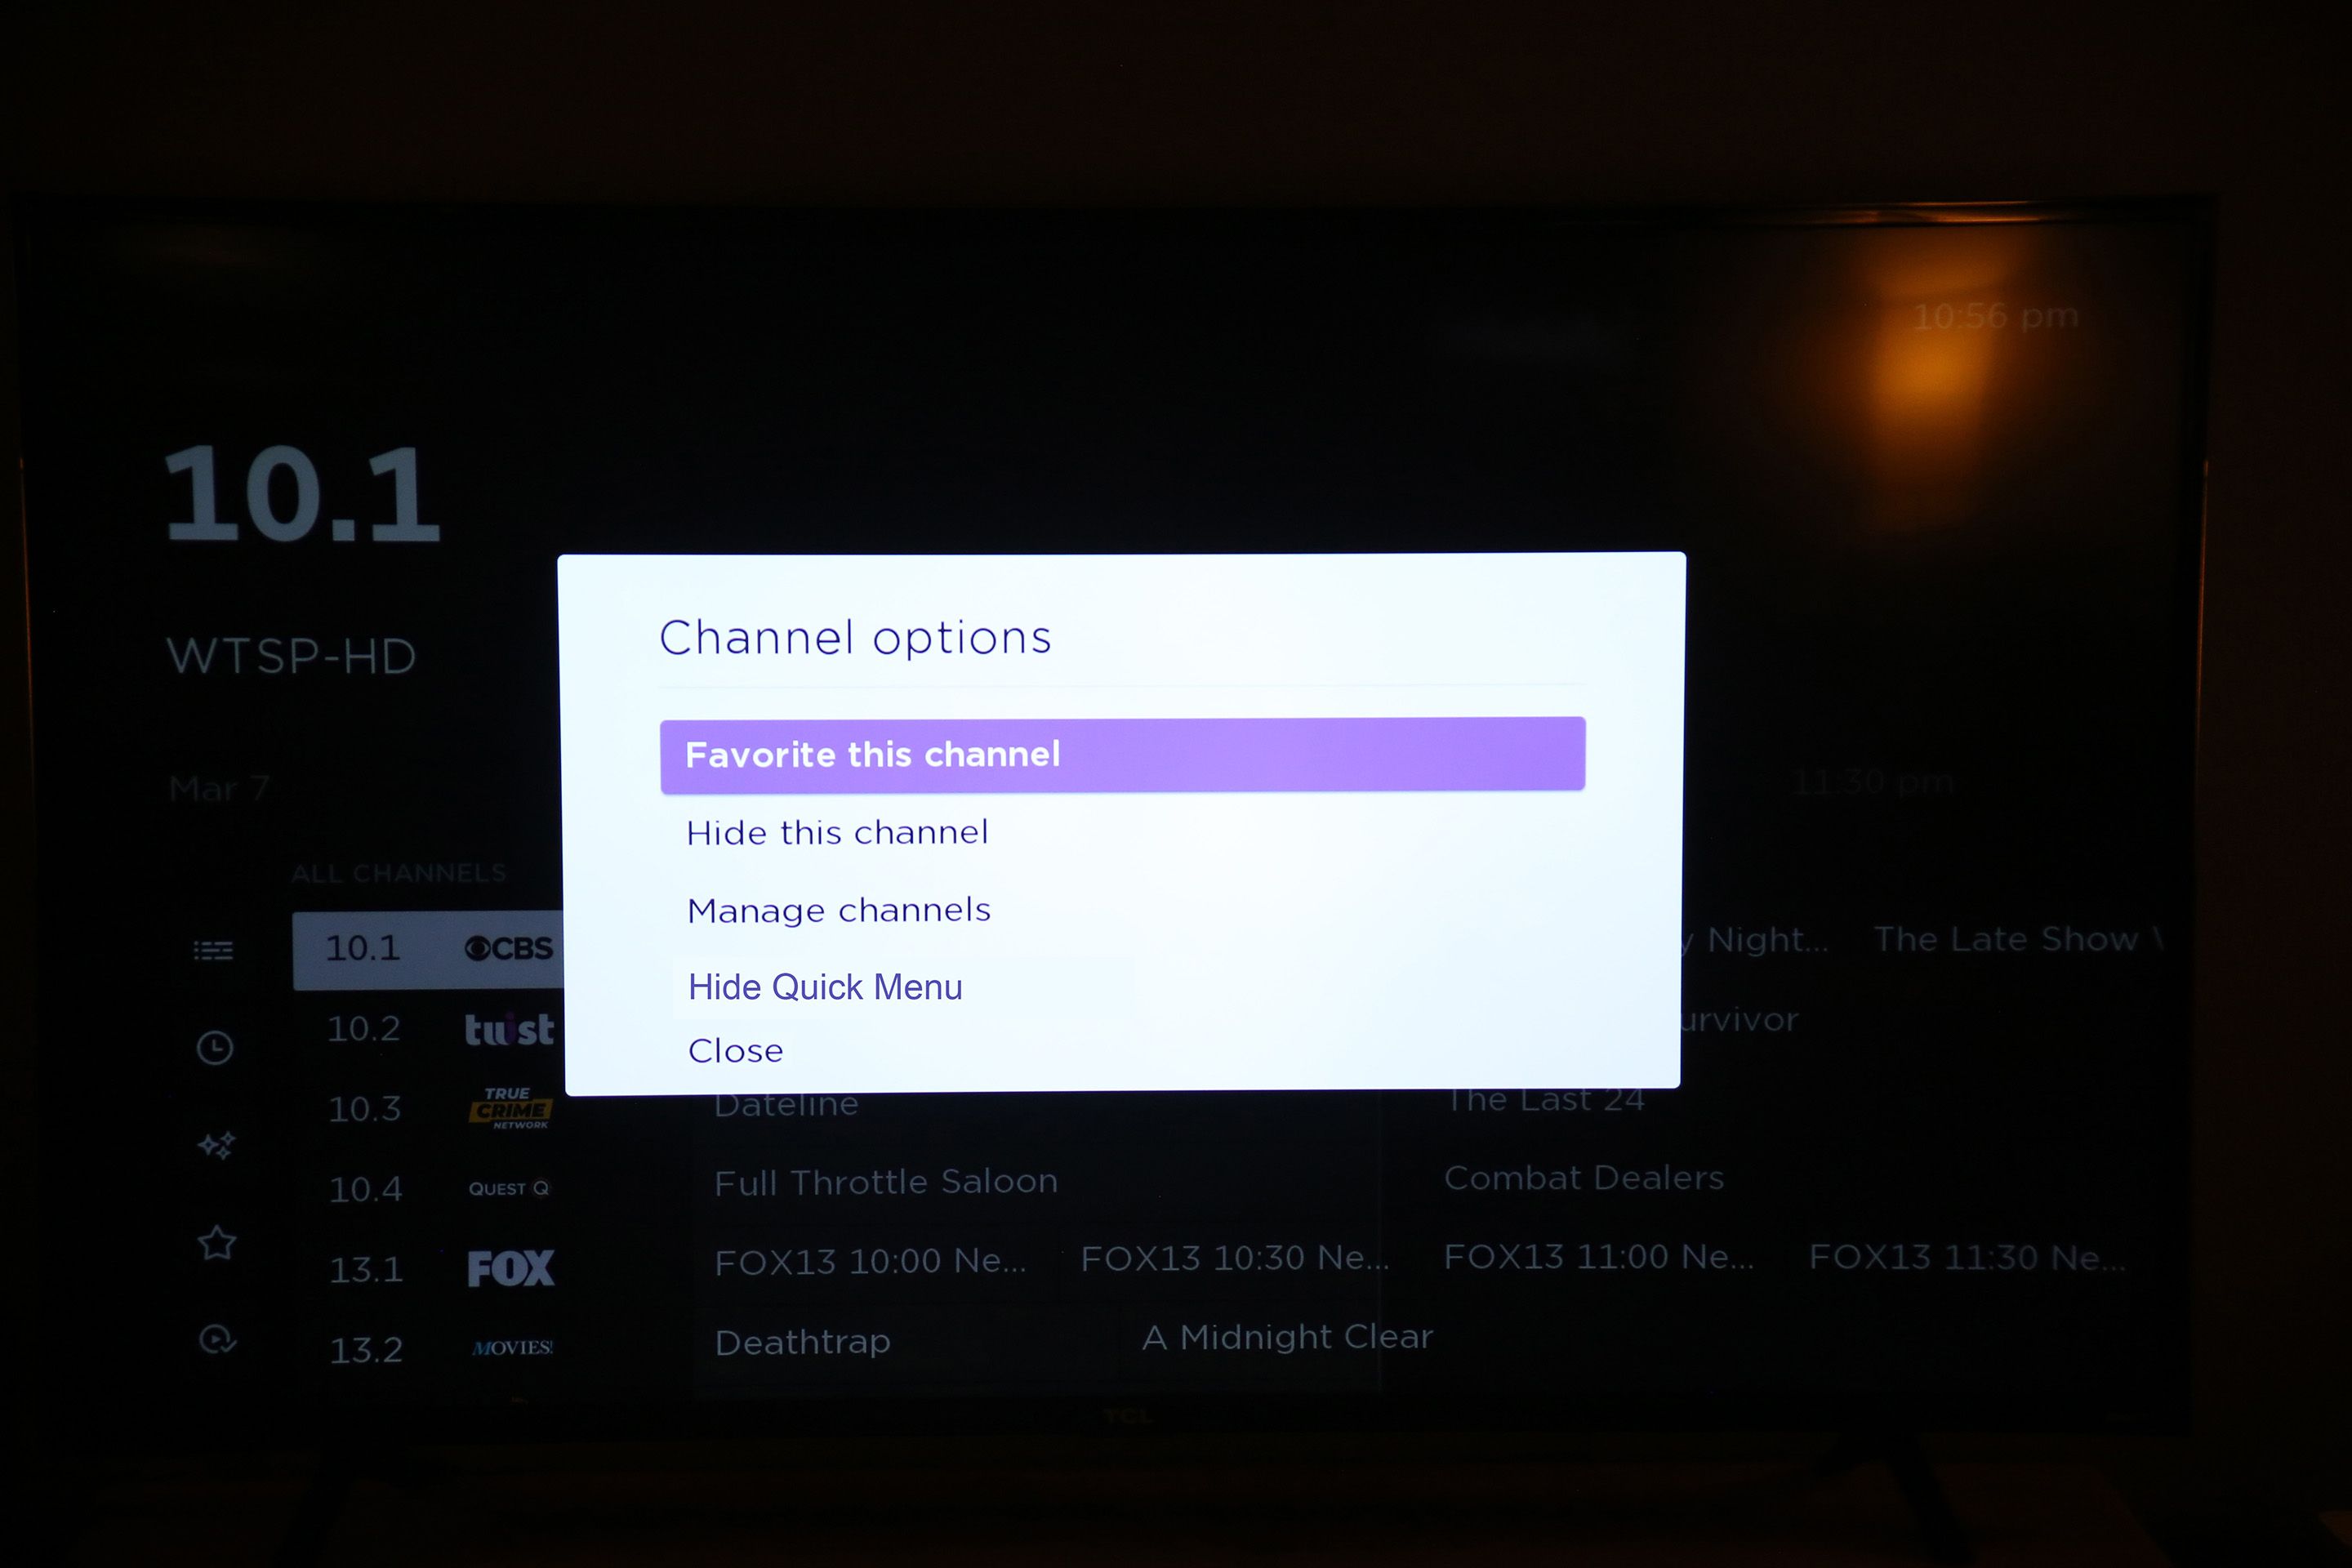 Comcast angers cable networks with channel lineup changes